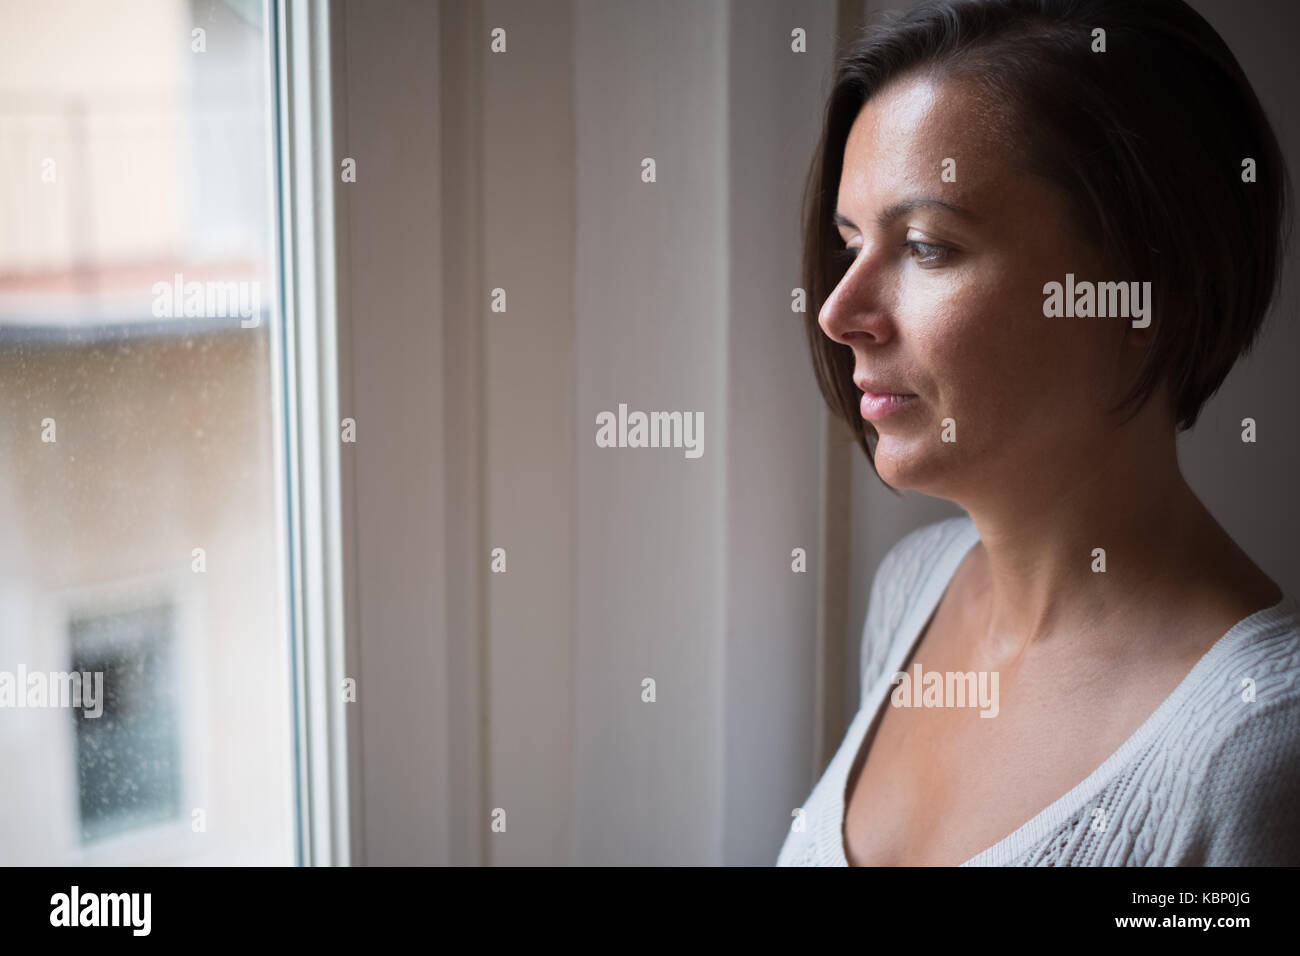 Handsome woman looking out the window Stock Photo - Alamy